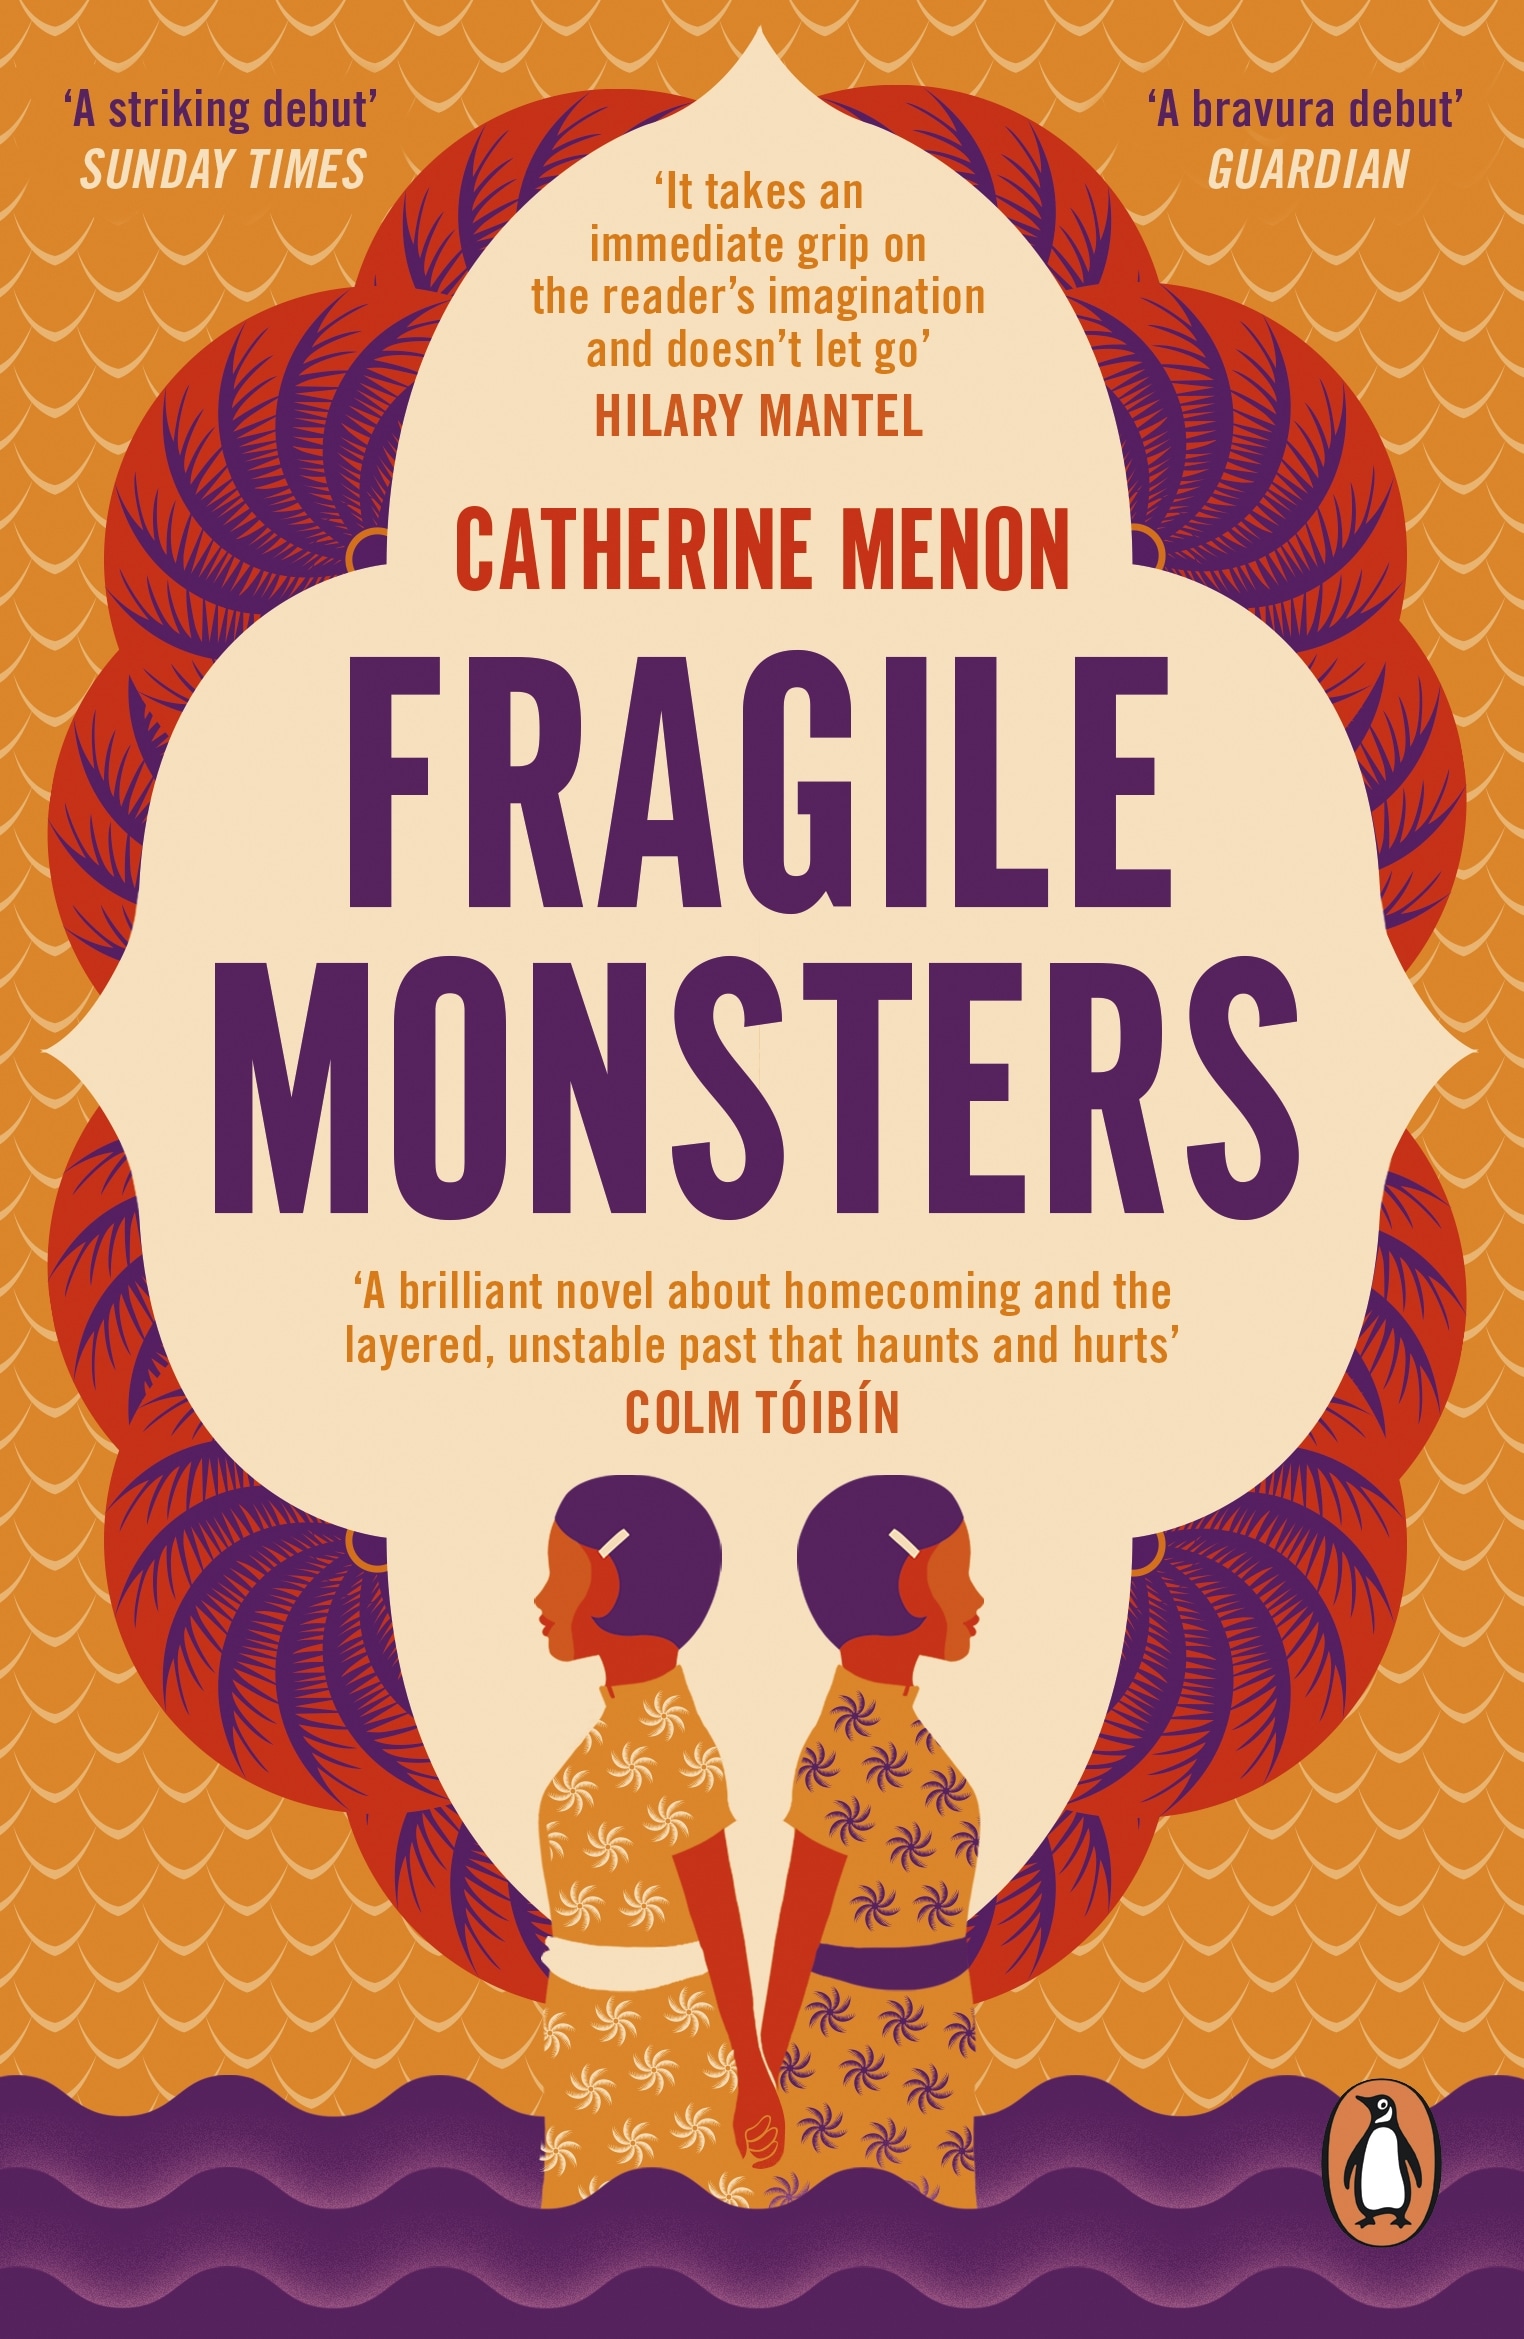 Book “Fragile Monsters” by Catherine Menon — April 7, 2022